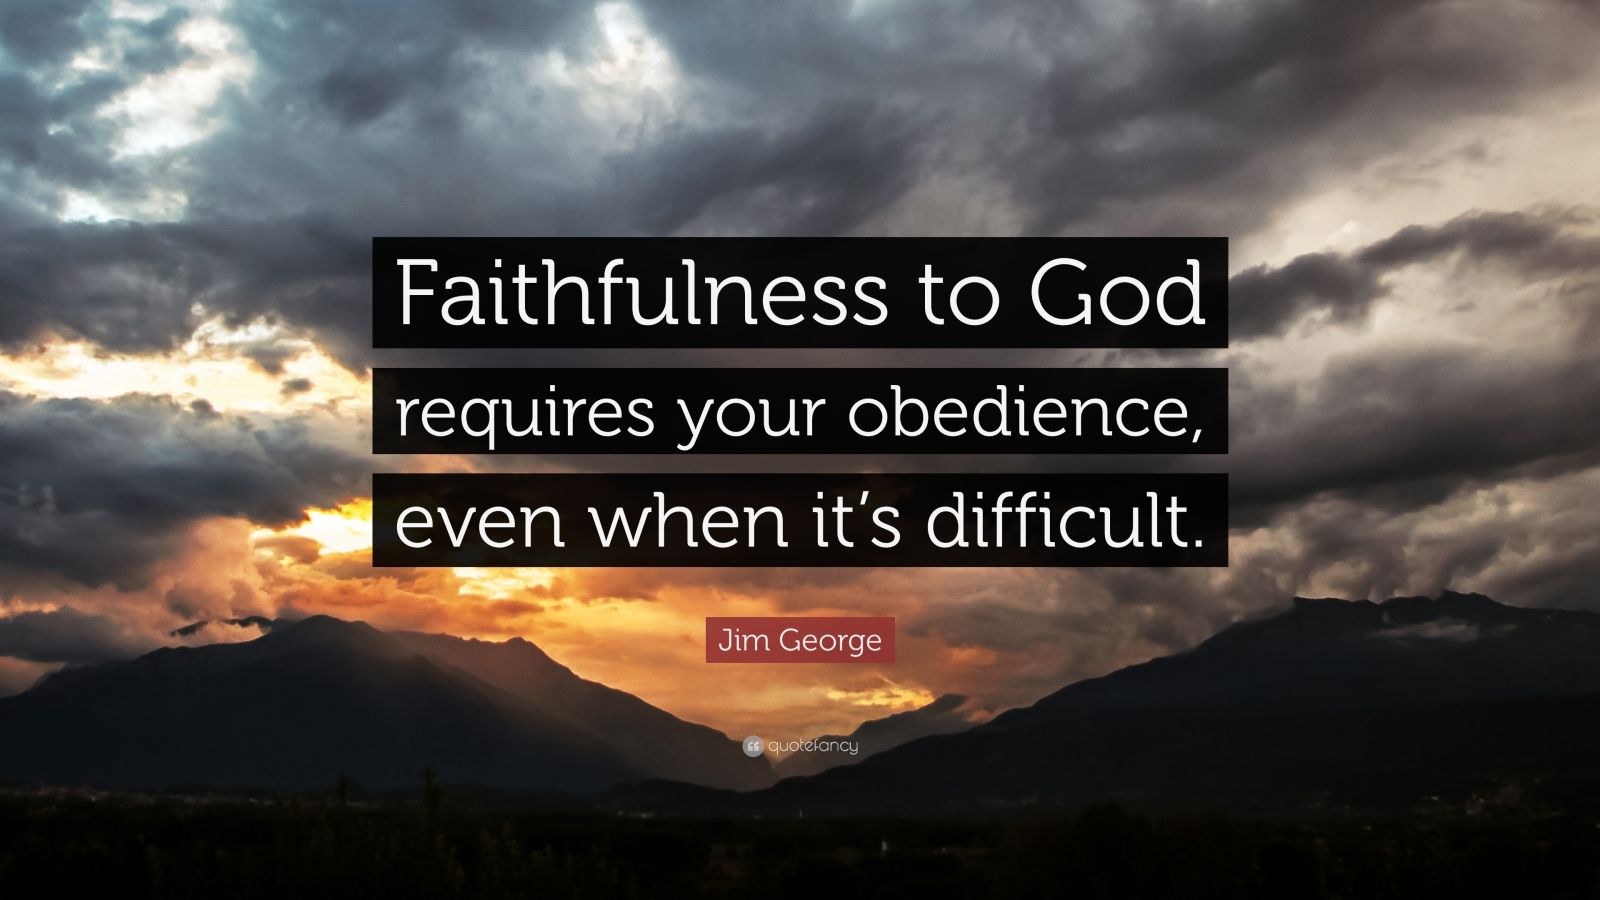 Jim George Quote: “Faithfulness to God requires your obedience, even ...